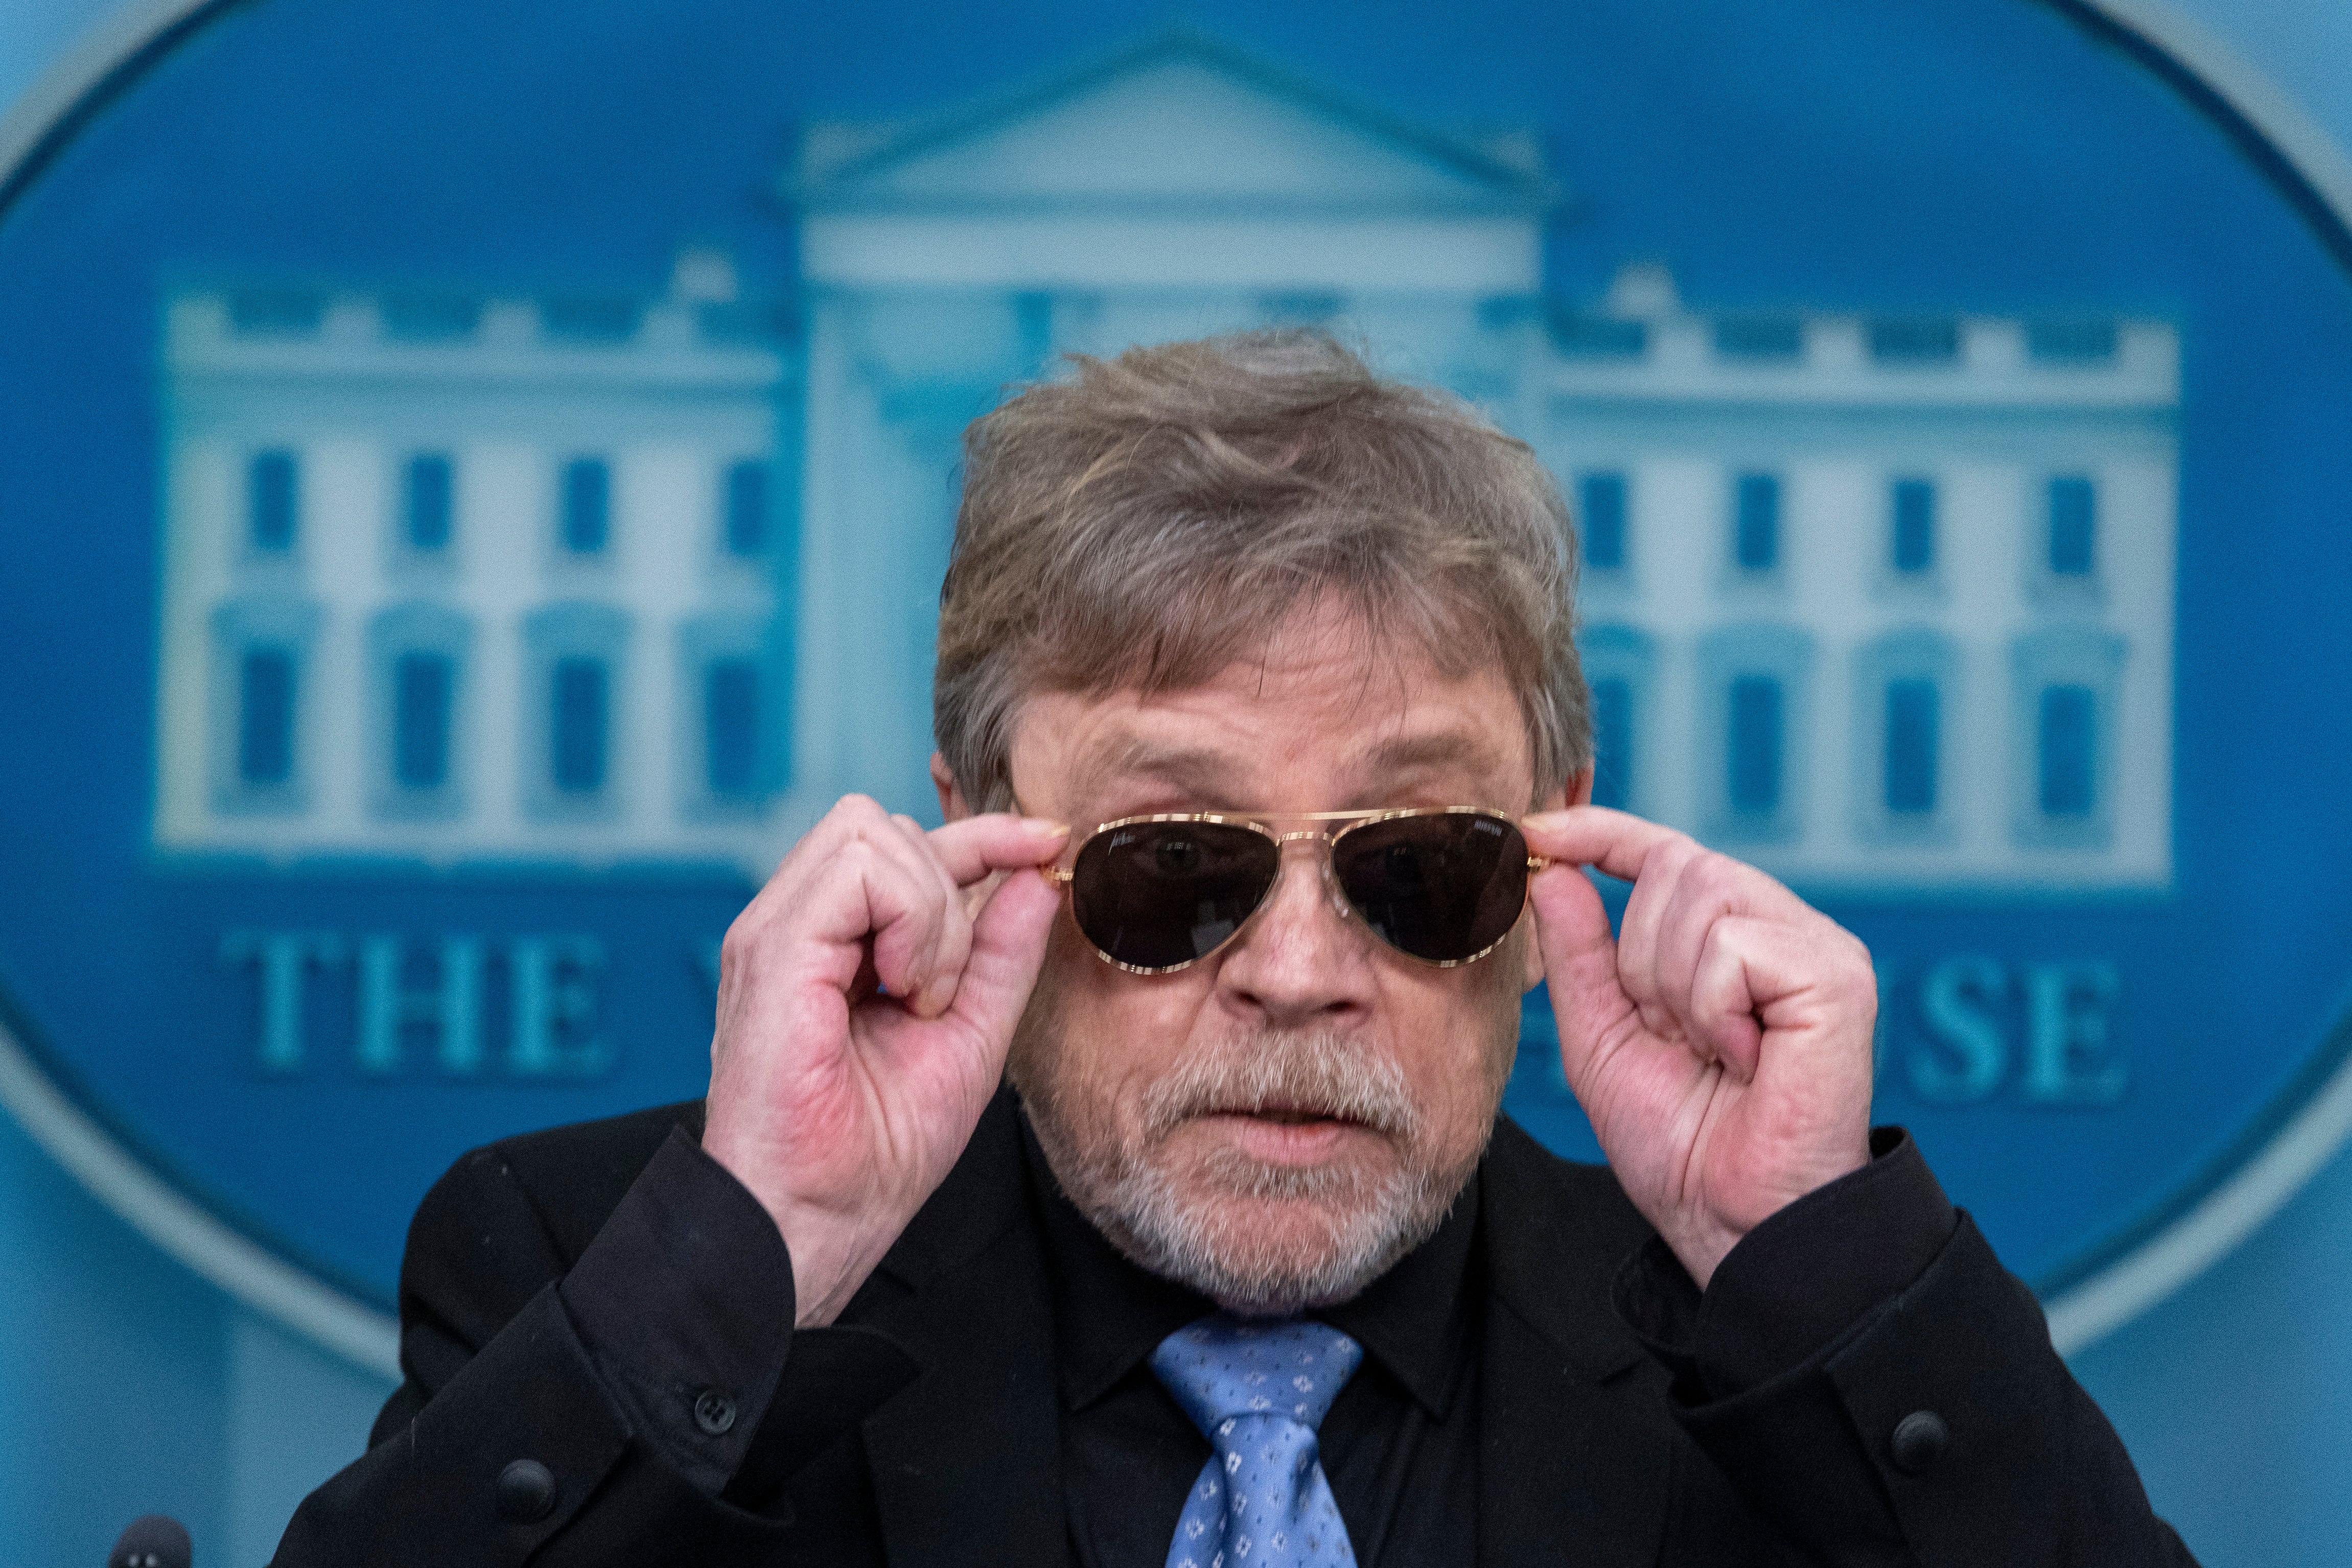 Actor Mark Hamill appeared in the White House briefing room in support of President Biden earlier this month